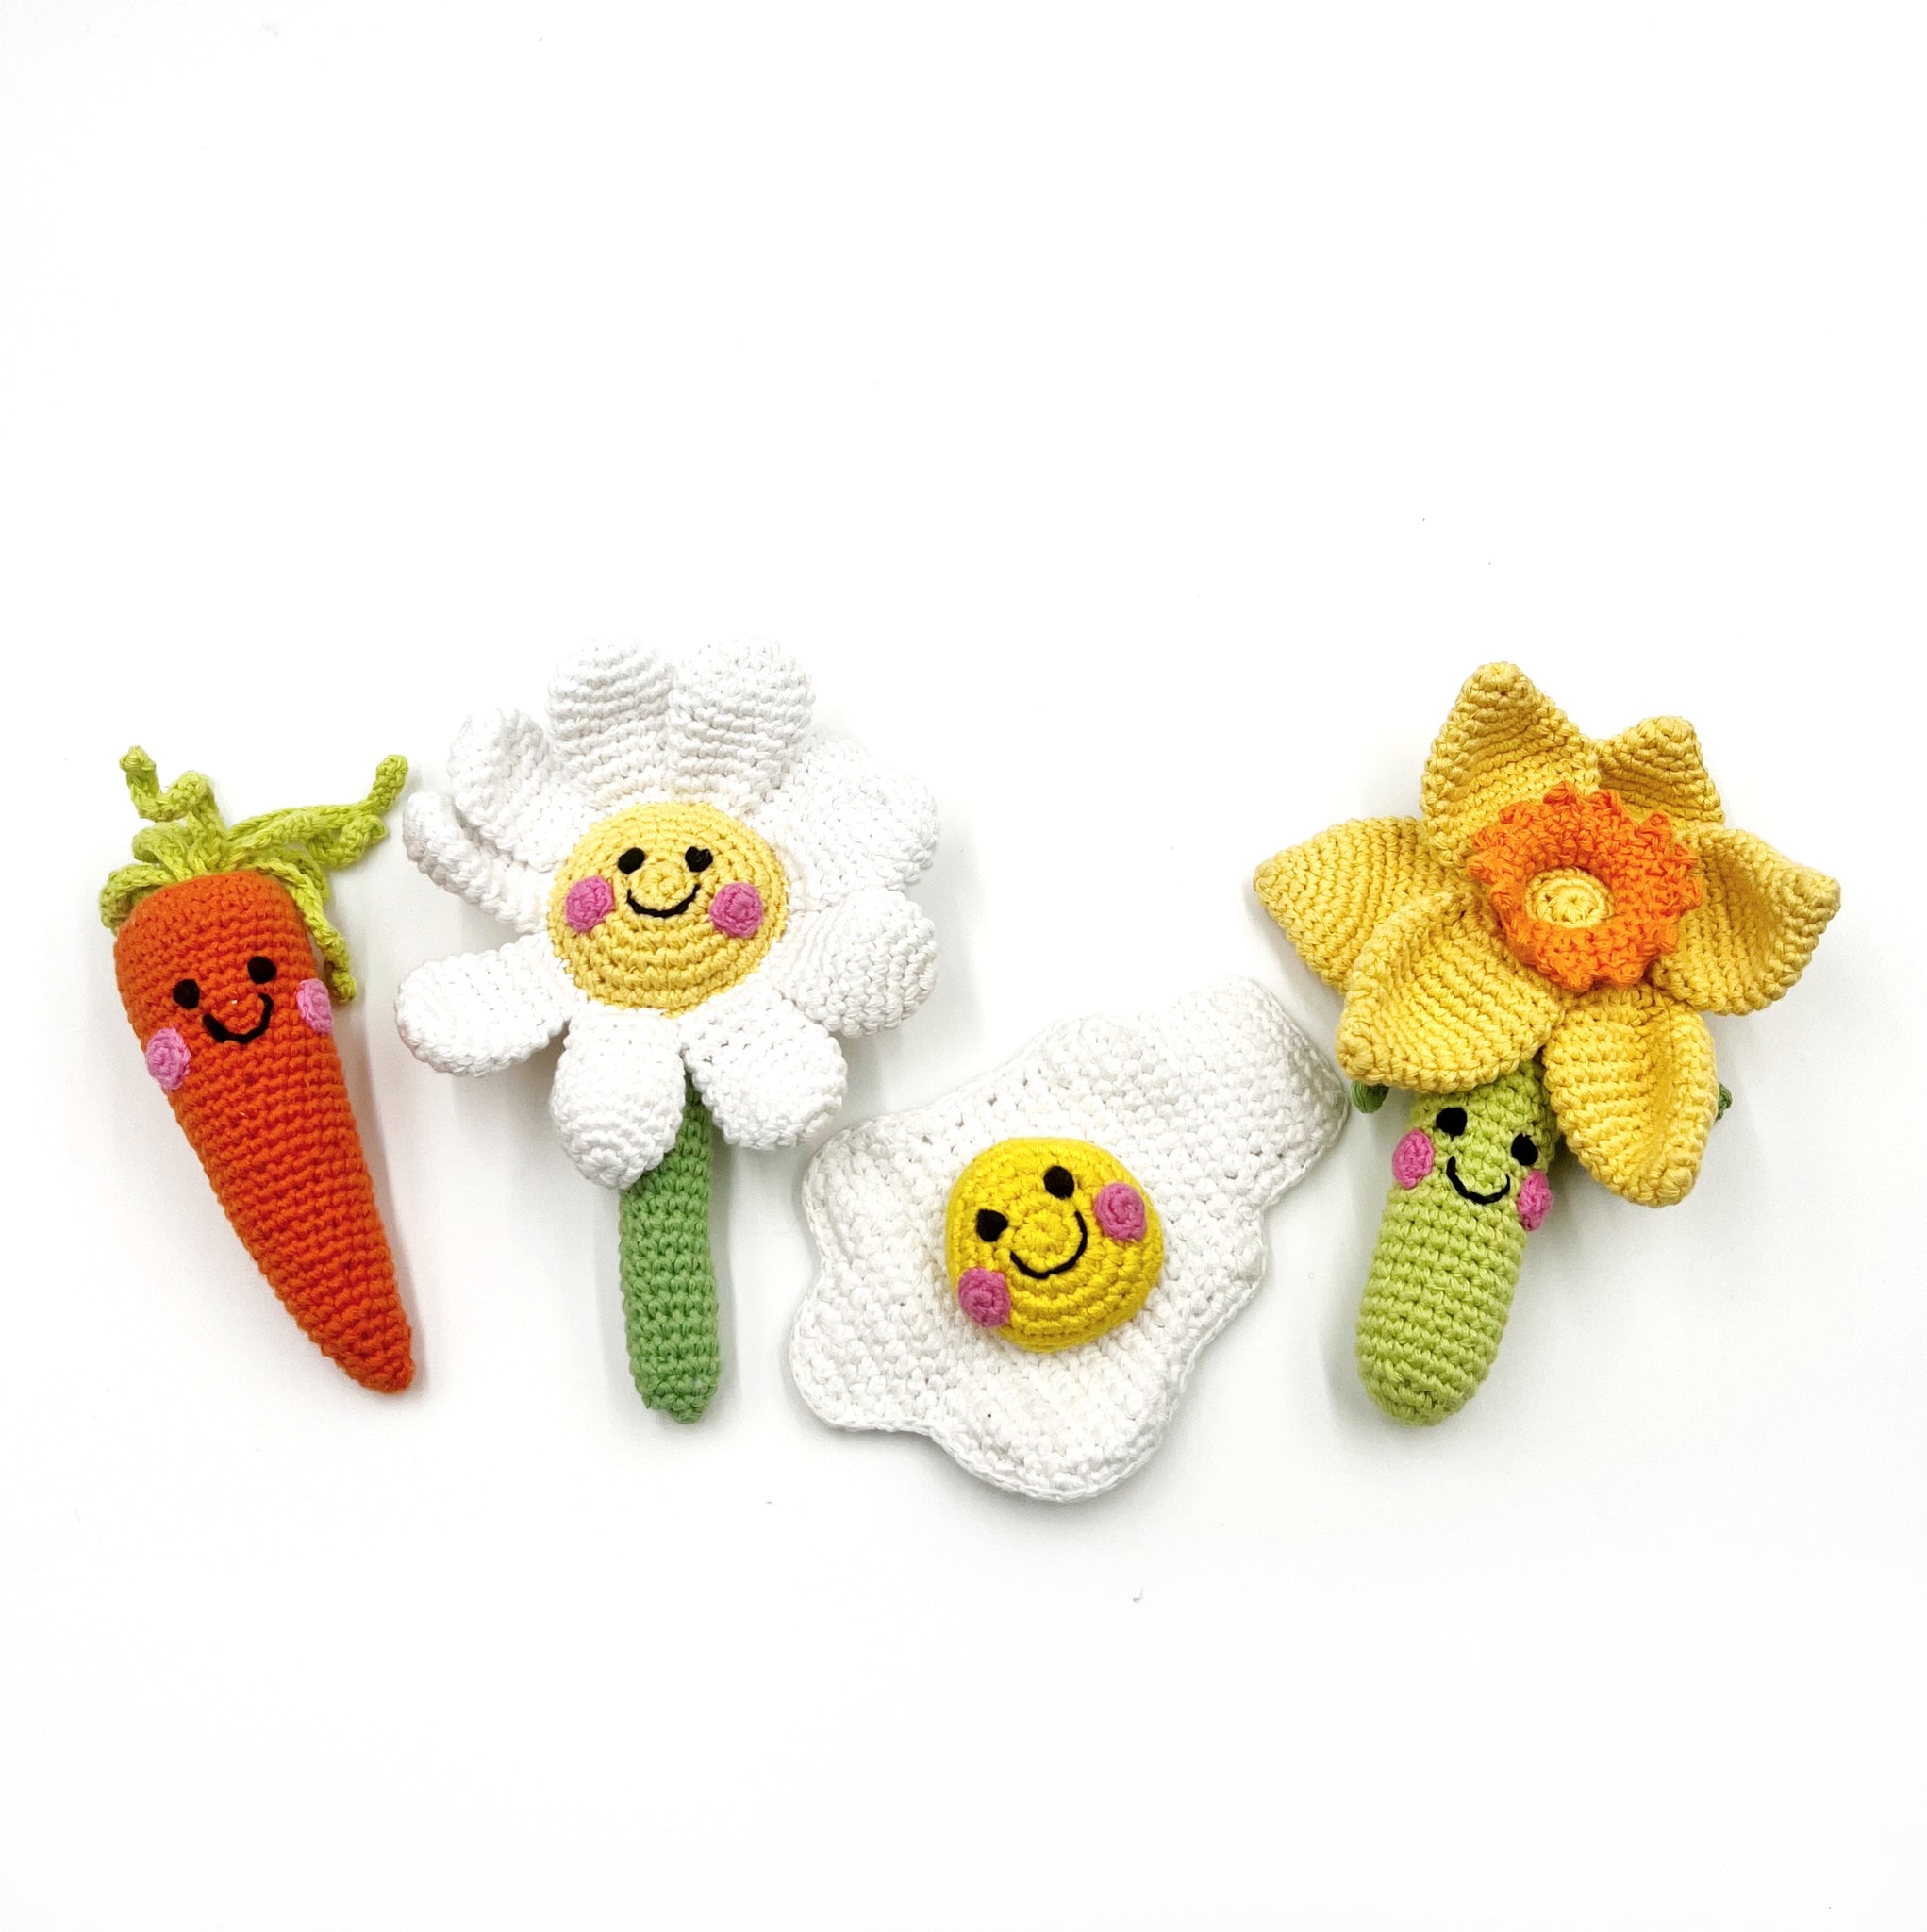 Carrot, daisy, fried egg and daffodil crochet plush toy rattles